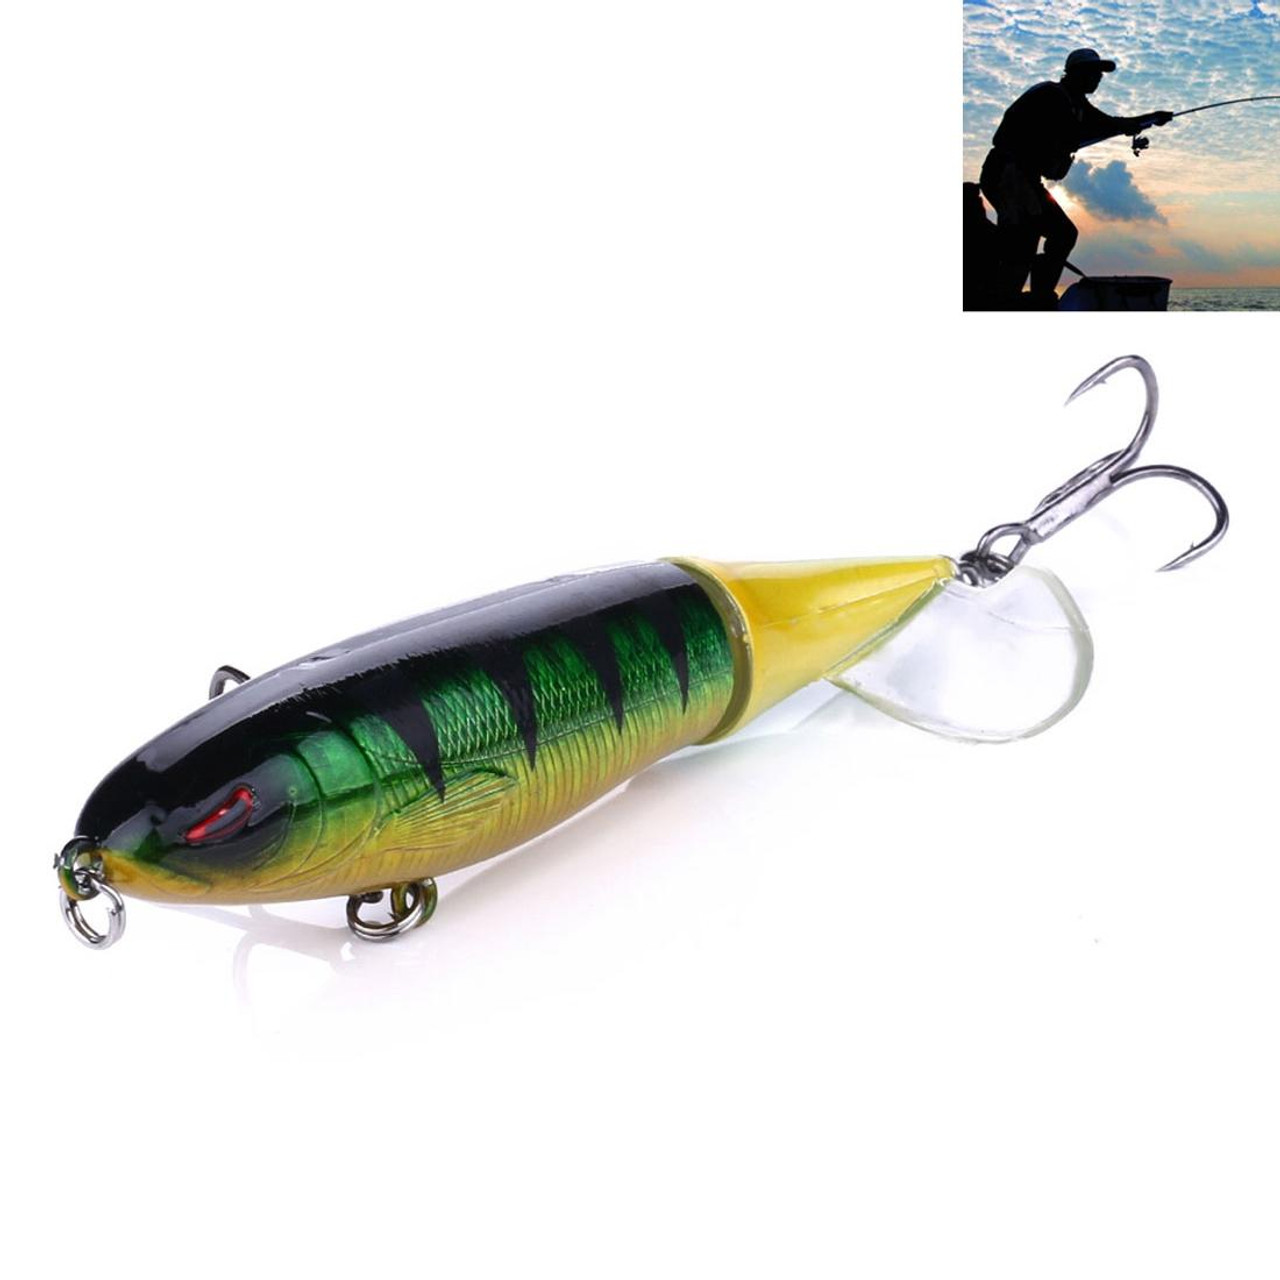 HENGJIA PE018 10cm/13g Propeller Tractor Shaped Hard Baits Fishing Lures  Tackle Baits Fit Saltwater and Freshwater (5#), snatcher